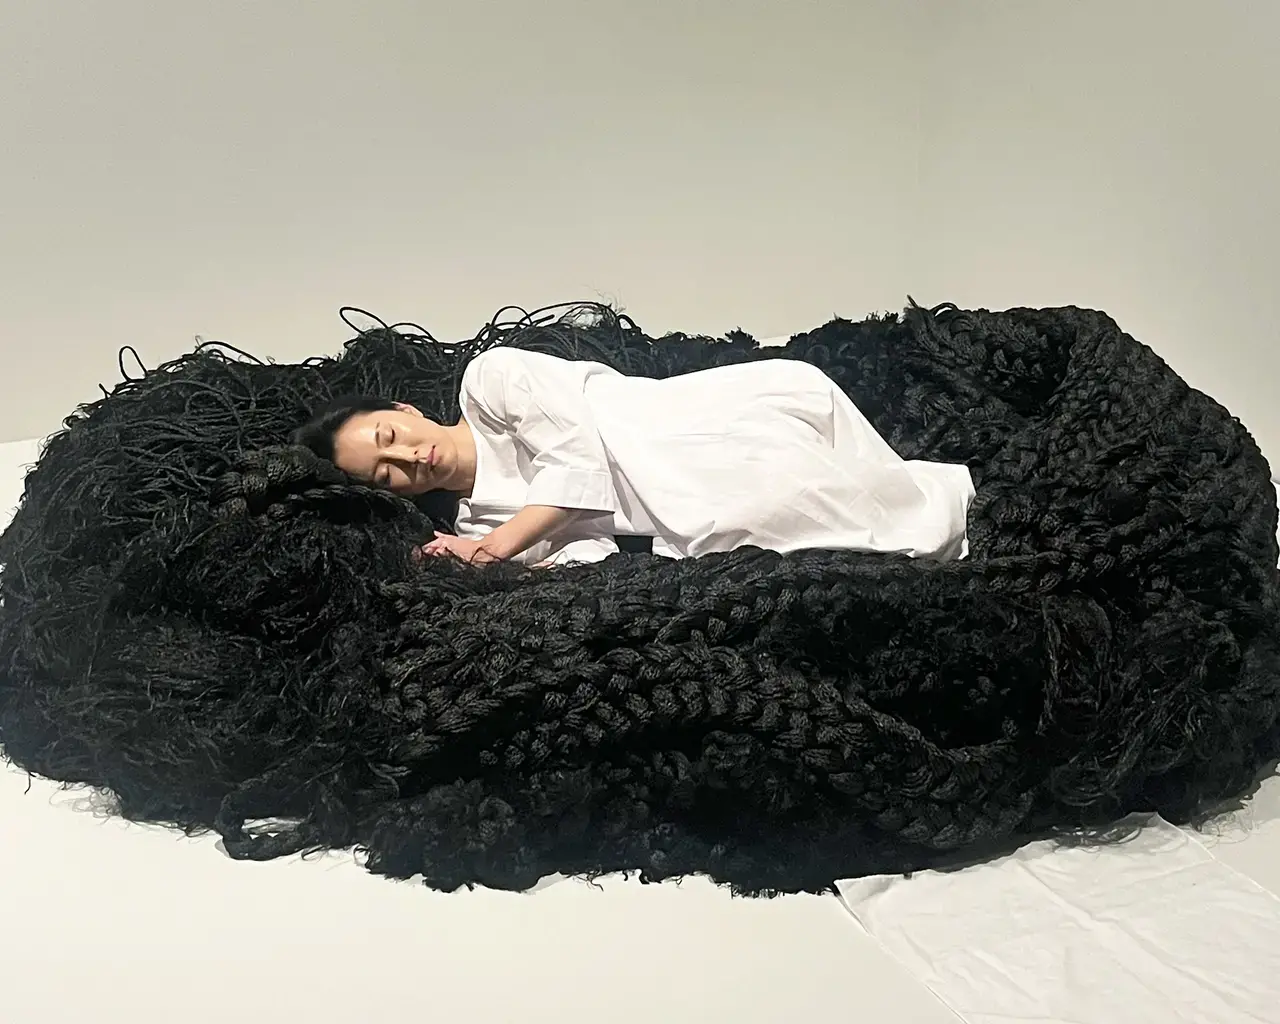 Yuni Kim Lang, Comfort Hair—Woven Identity I, 2013, polypropylene rope, 80" x 100", included in Philadelphia Museum of Art’s The Shape of Time: Korean Art After 1989. Photo by The Pew Center for Arts &amp; Heritage.